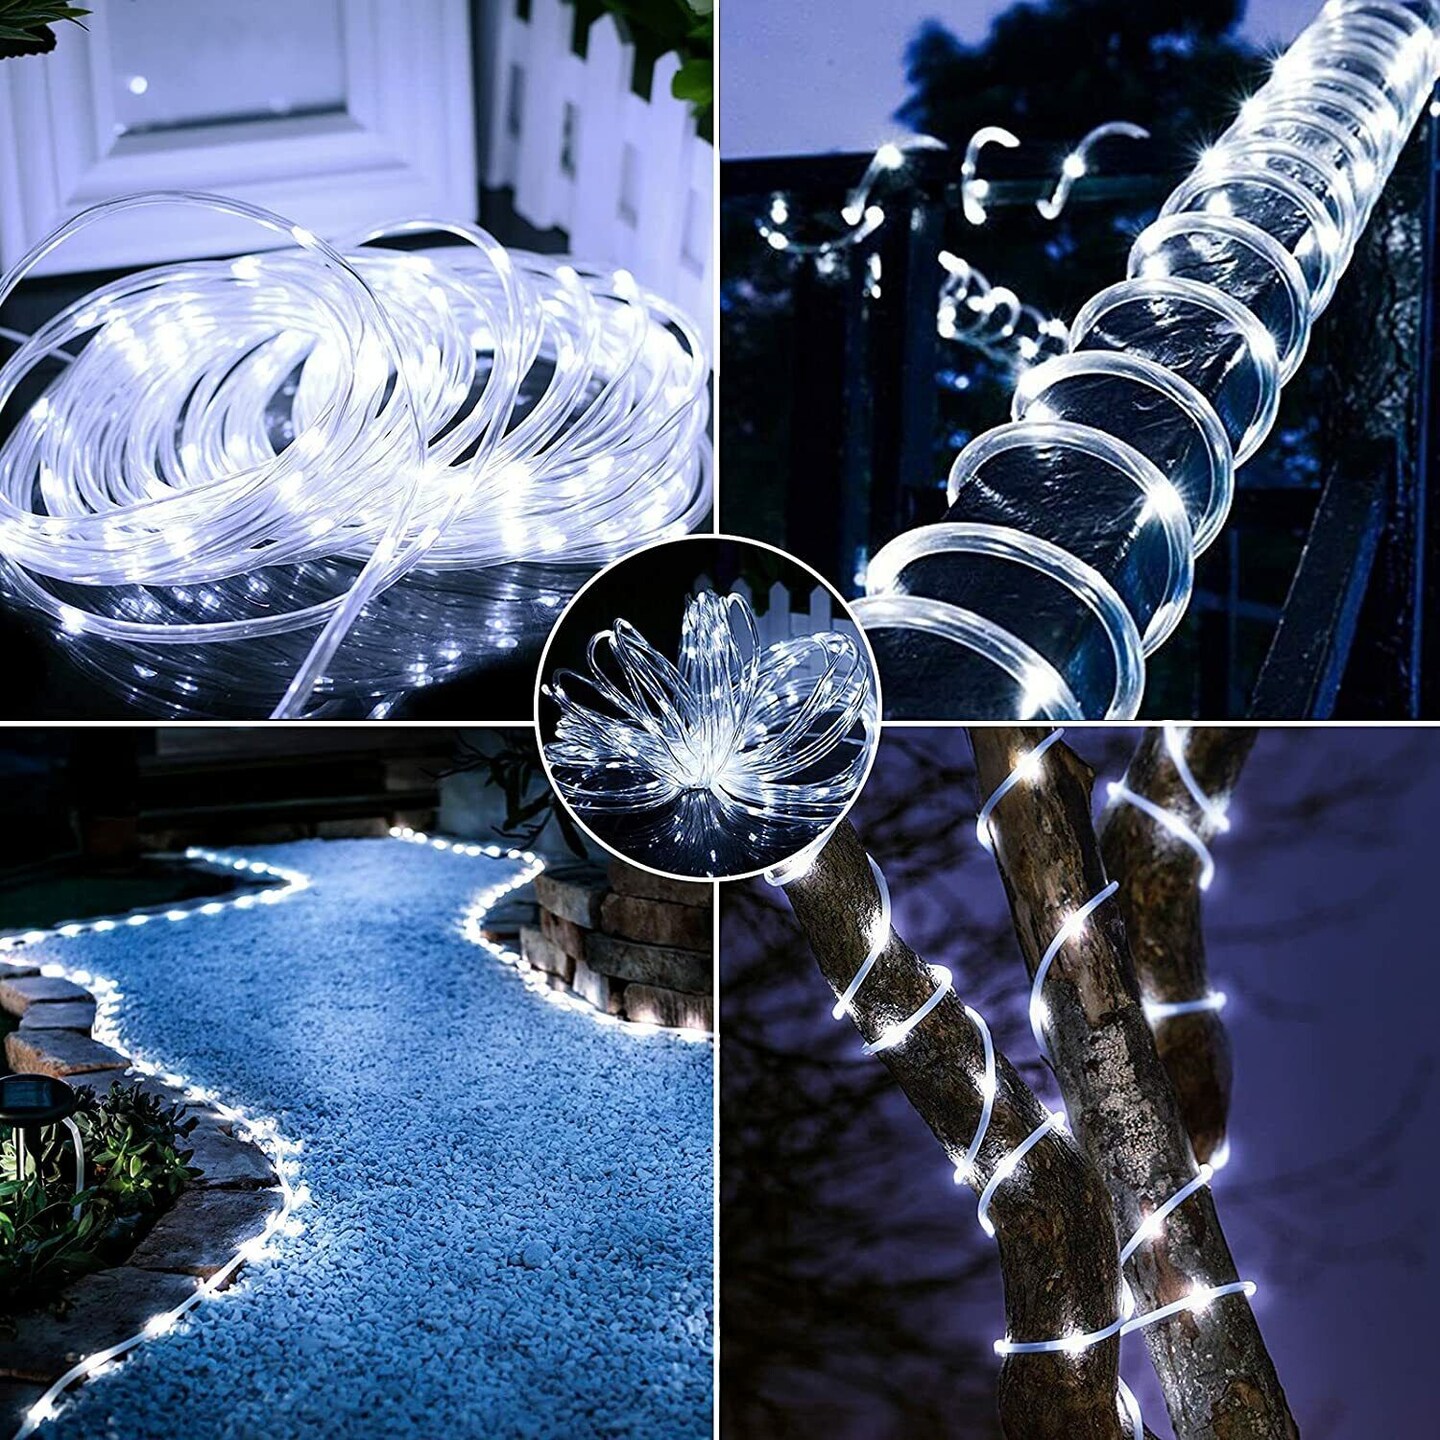 Buy Camping String Lights,33Ft 100LEDs String Light with Camping